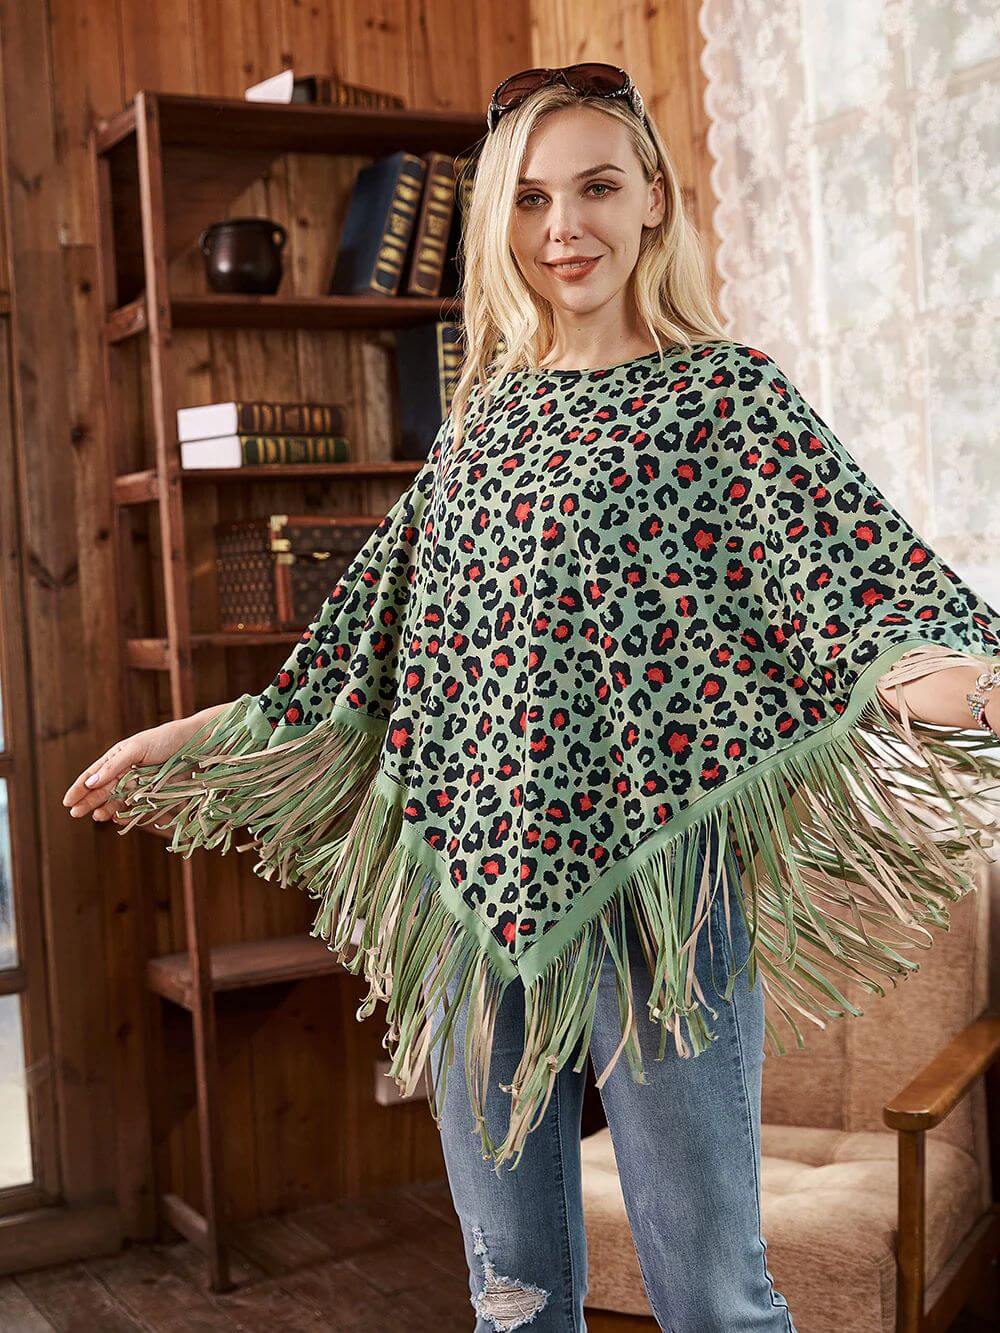 Montana-West-American-Bling-Turquoise-Leopard-Fringe-Poncho-Turquoise-PCH-1739-TQ-3